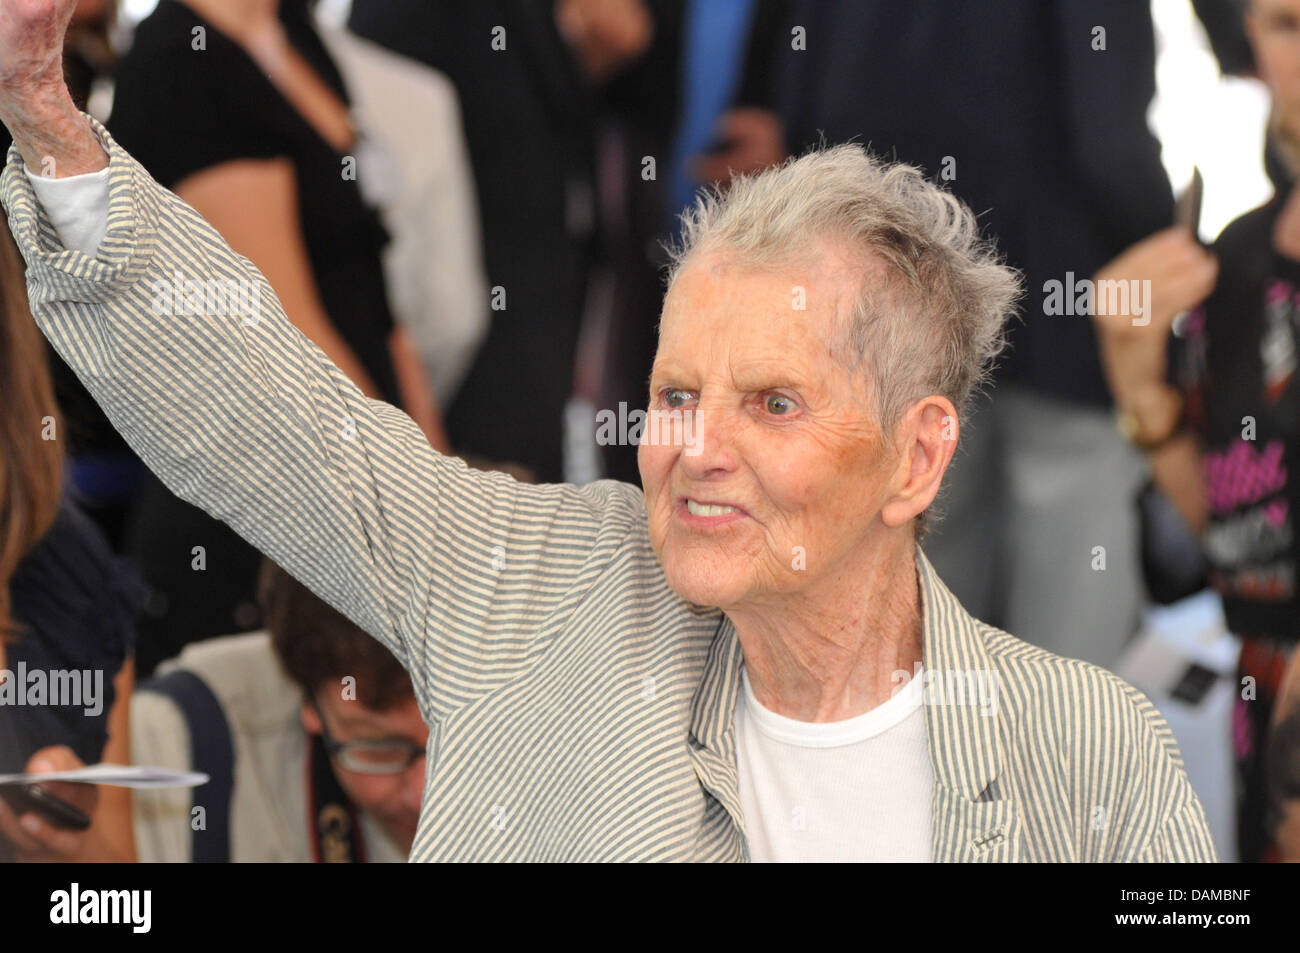 Artist Elaine Sturtevant poses during the opening of the 54th Venice Biennale in Venice, Italy, 04 June 2011. She recieved the Golden Lion for lifetime achievement. The Biennale takes place every two years in Venice, Italy. Photo: Felix Hoerhager Stock Photo